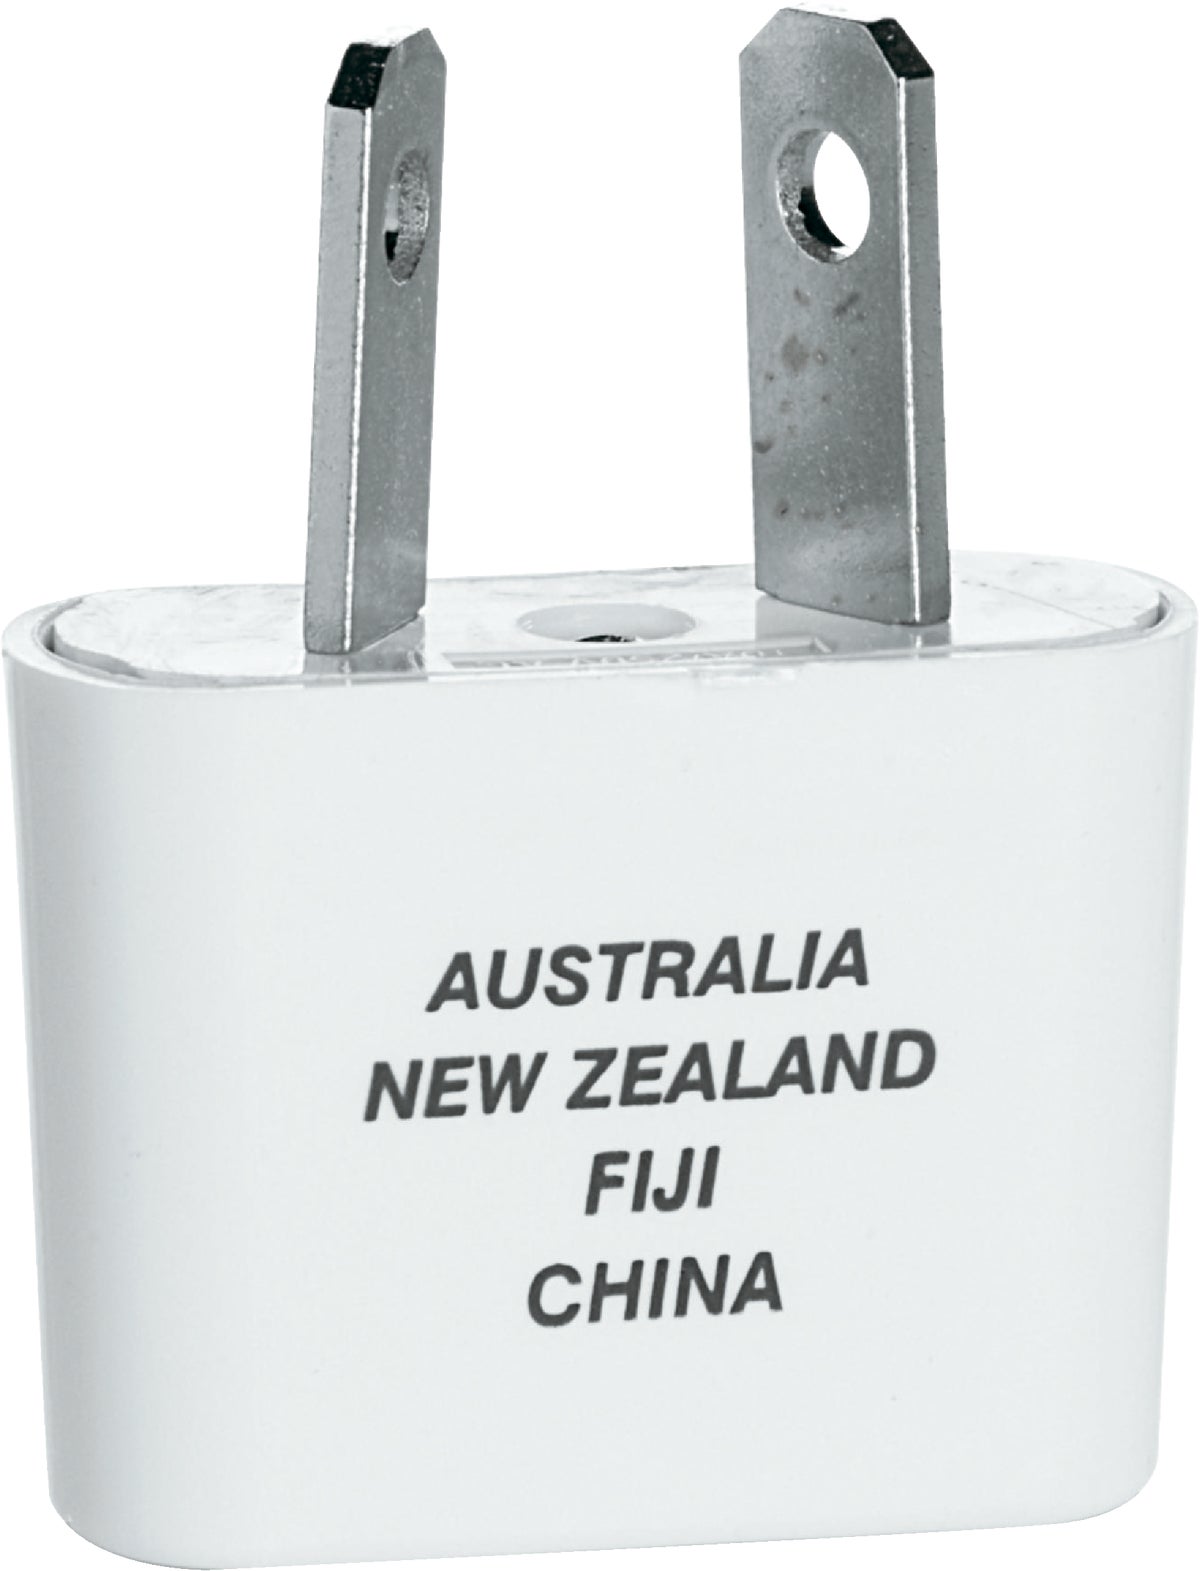 foreign plug adapter